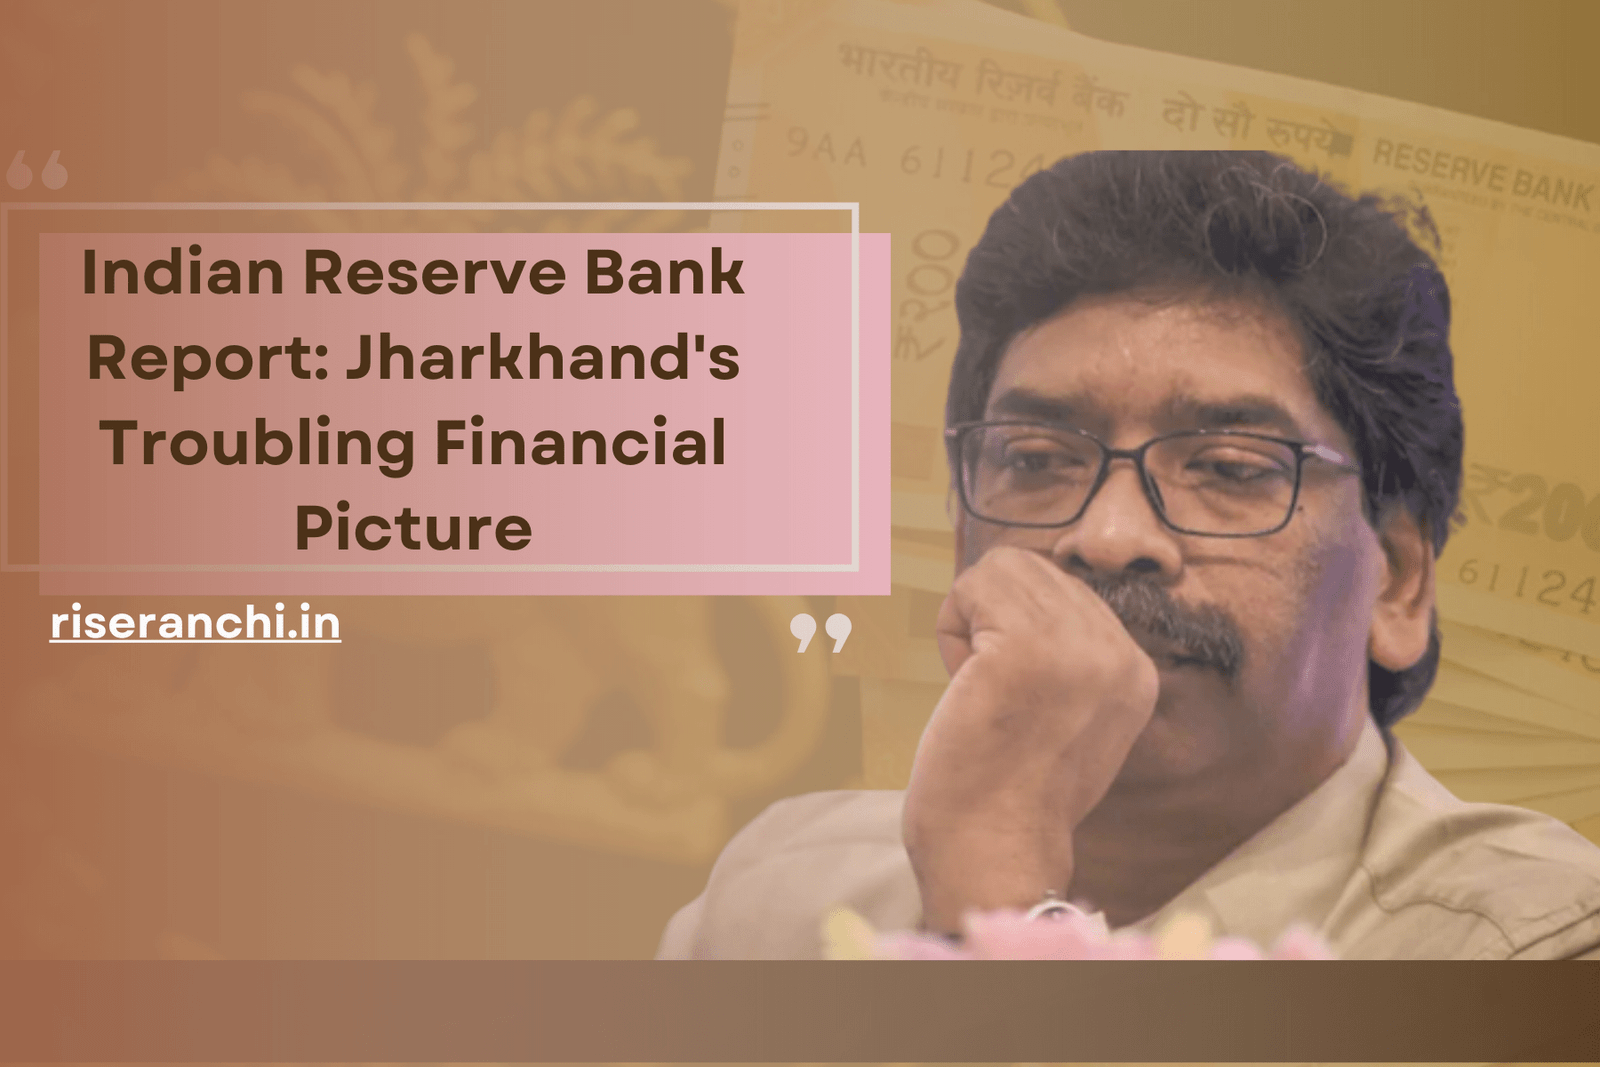 Examining Jharkhand's Economic Concerns: An Analysis of the Reserve Bank's Report